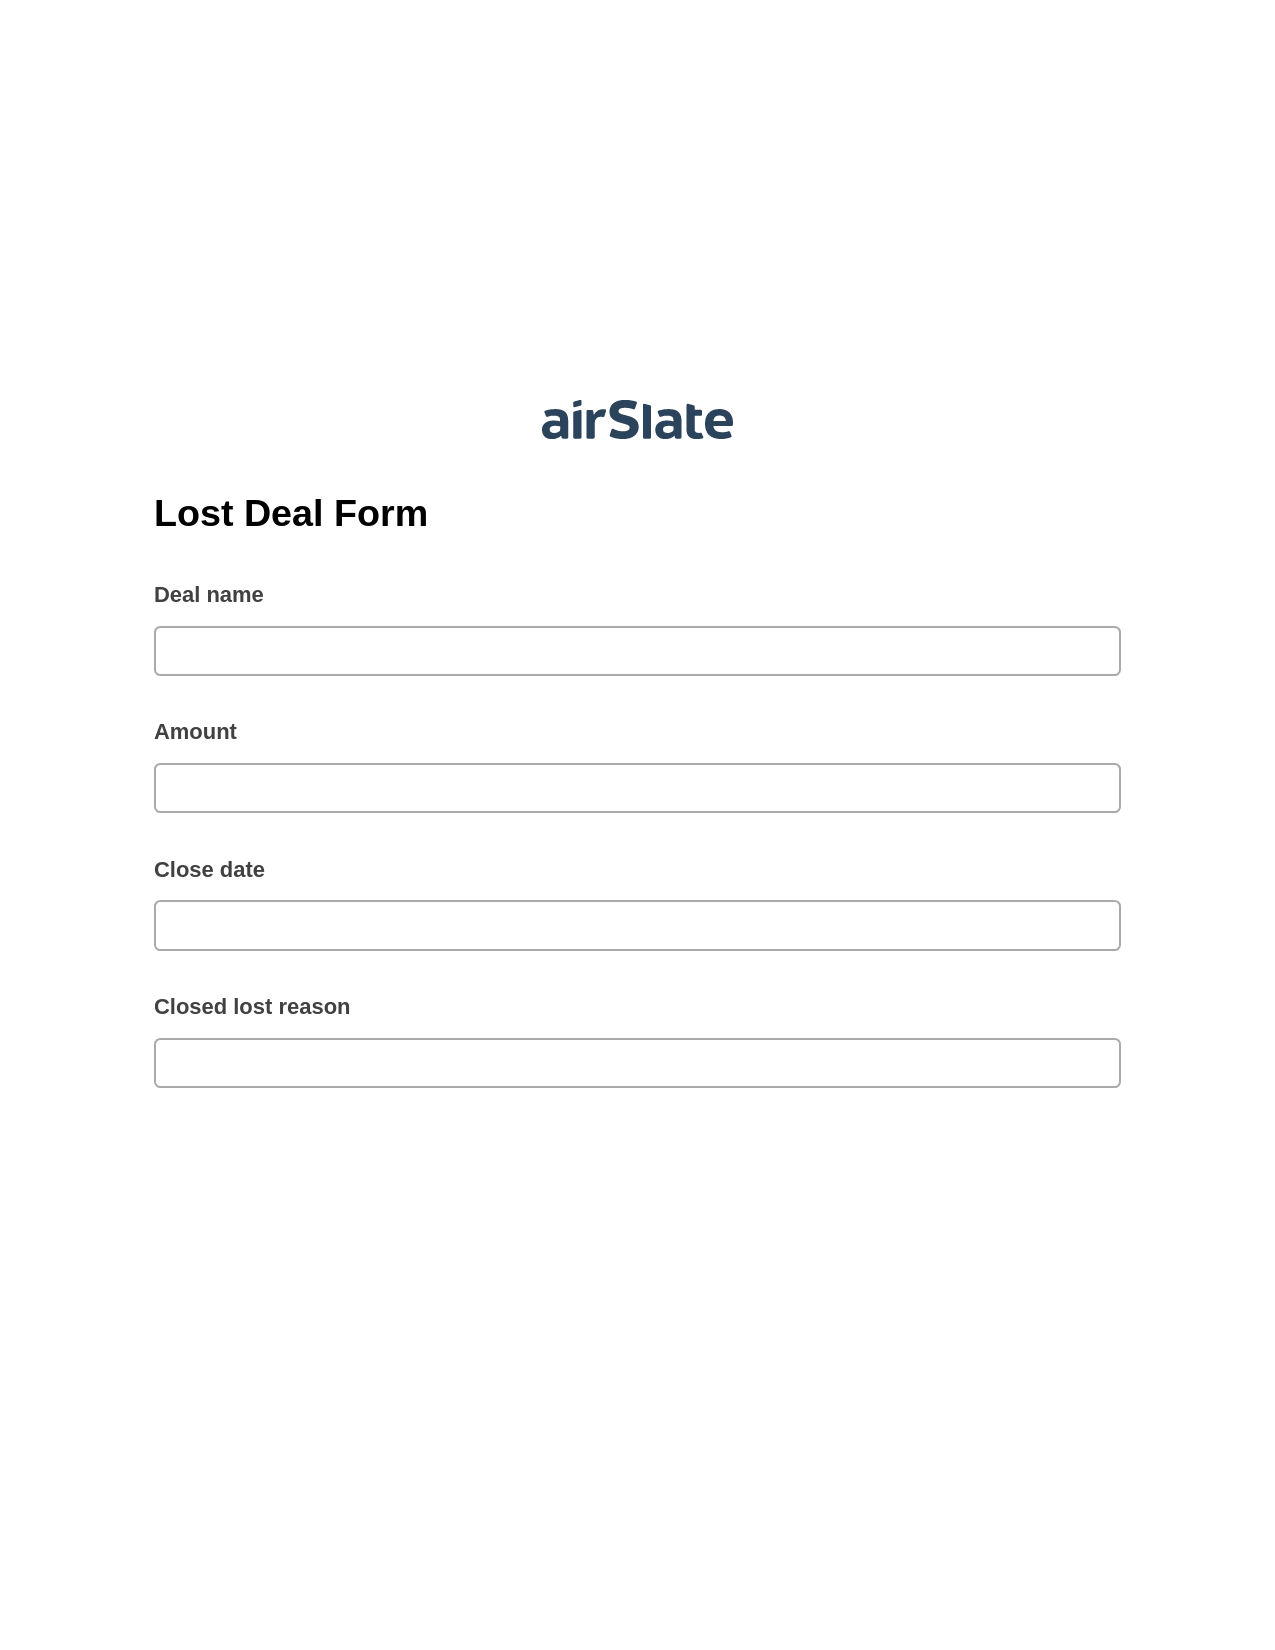 Multirole Lost Deal Form Pre-fill from CSV File Bot, System Bot - Create a Slate in another Flow, Archive to Google Drive Bot